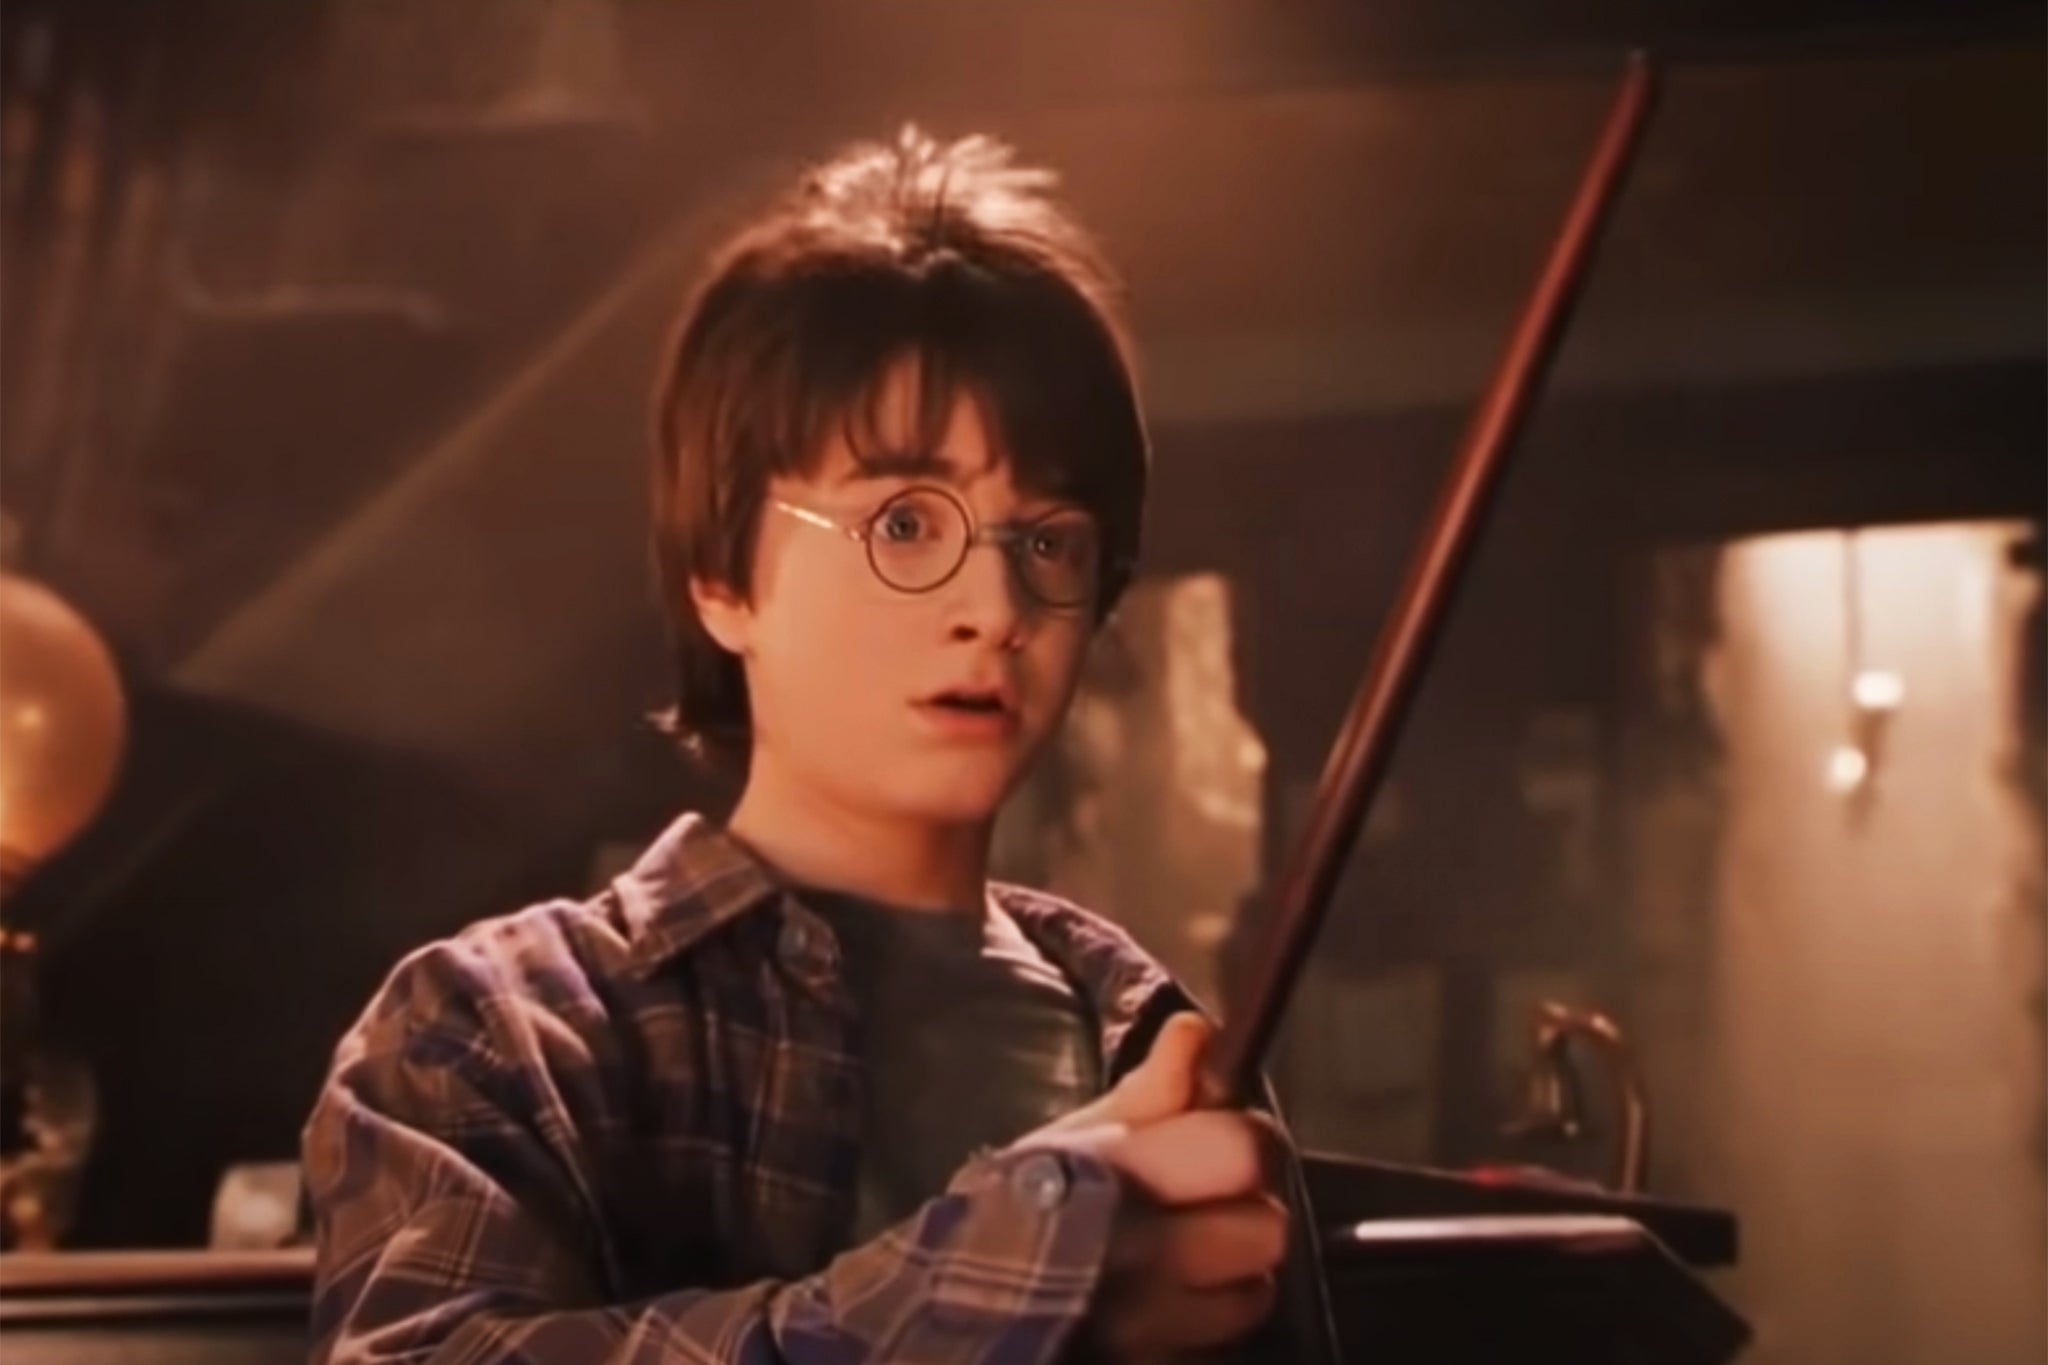 <p>Daniel Radcliffe as Harry Potter with wand in hand </p>